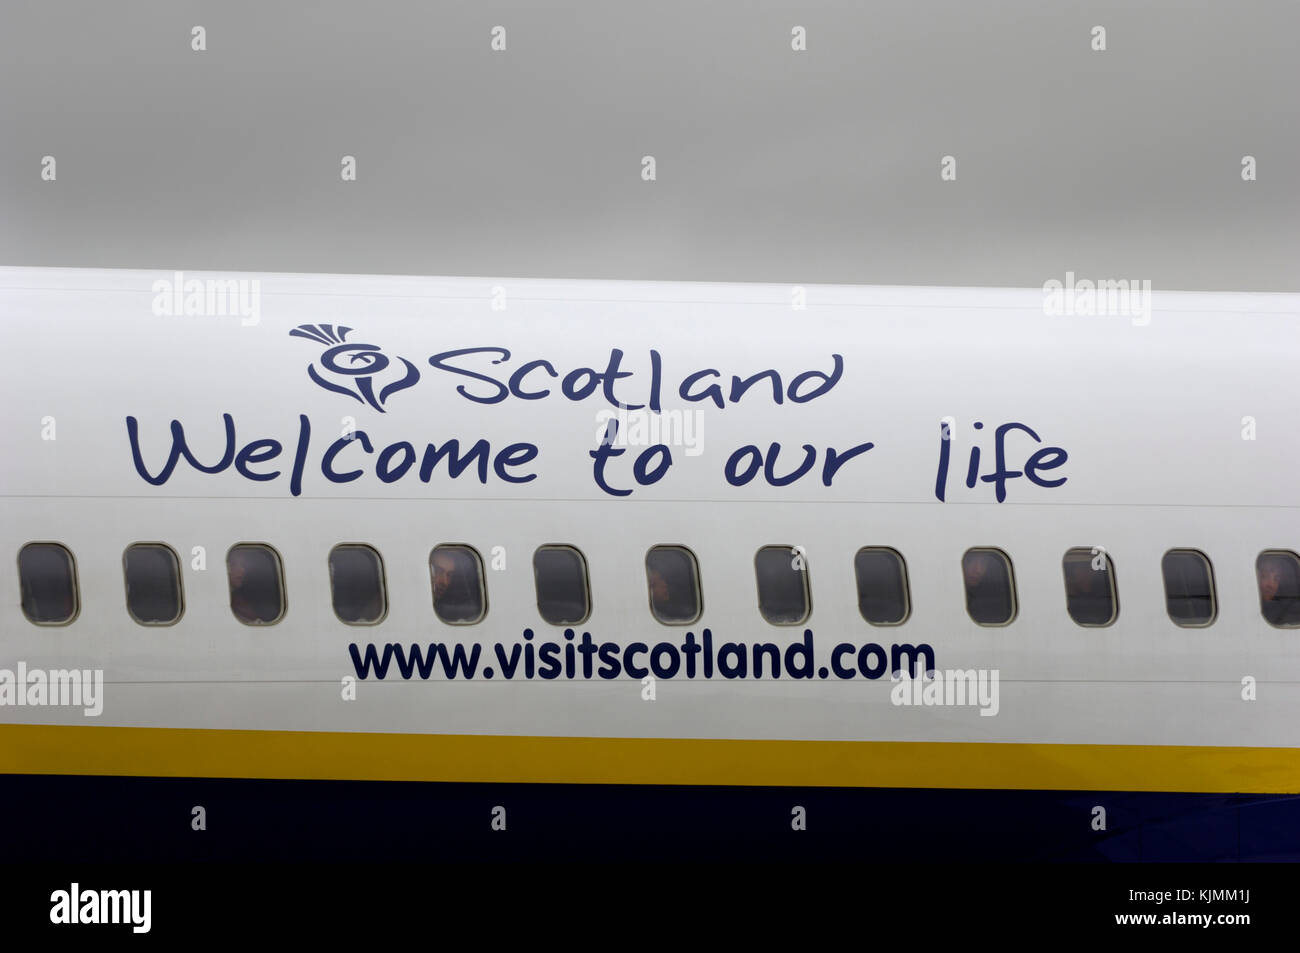 'Scotland Welcome to our life www.visitscotland.com' advert titles on the fuselage Stock Photo